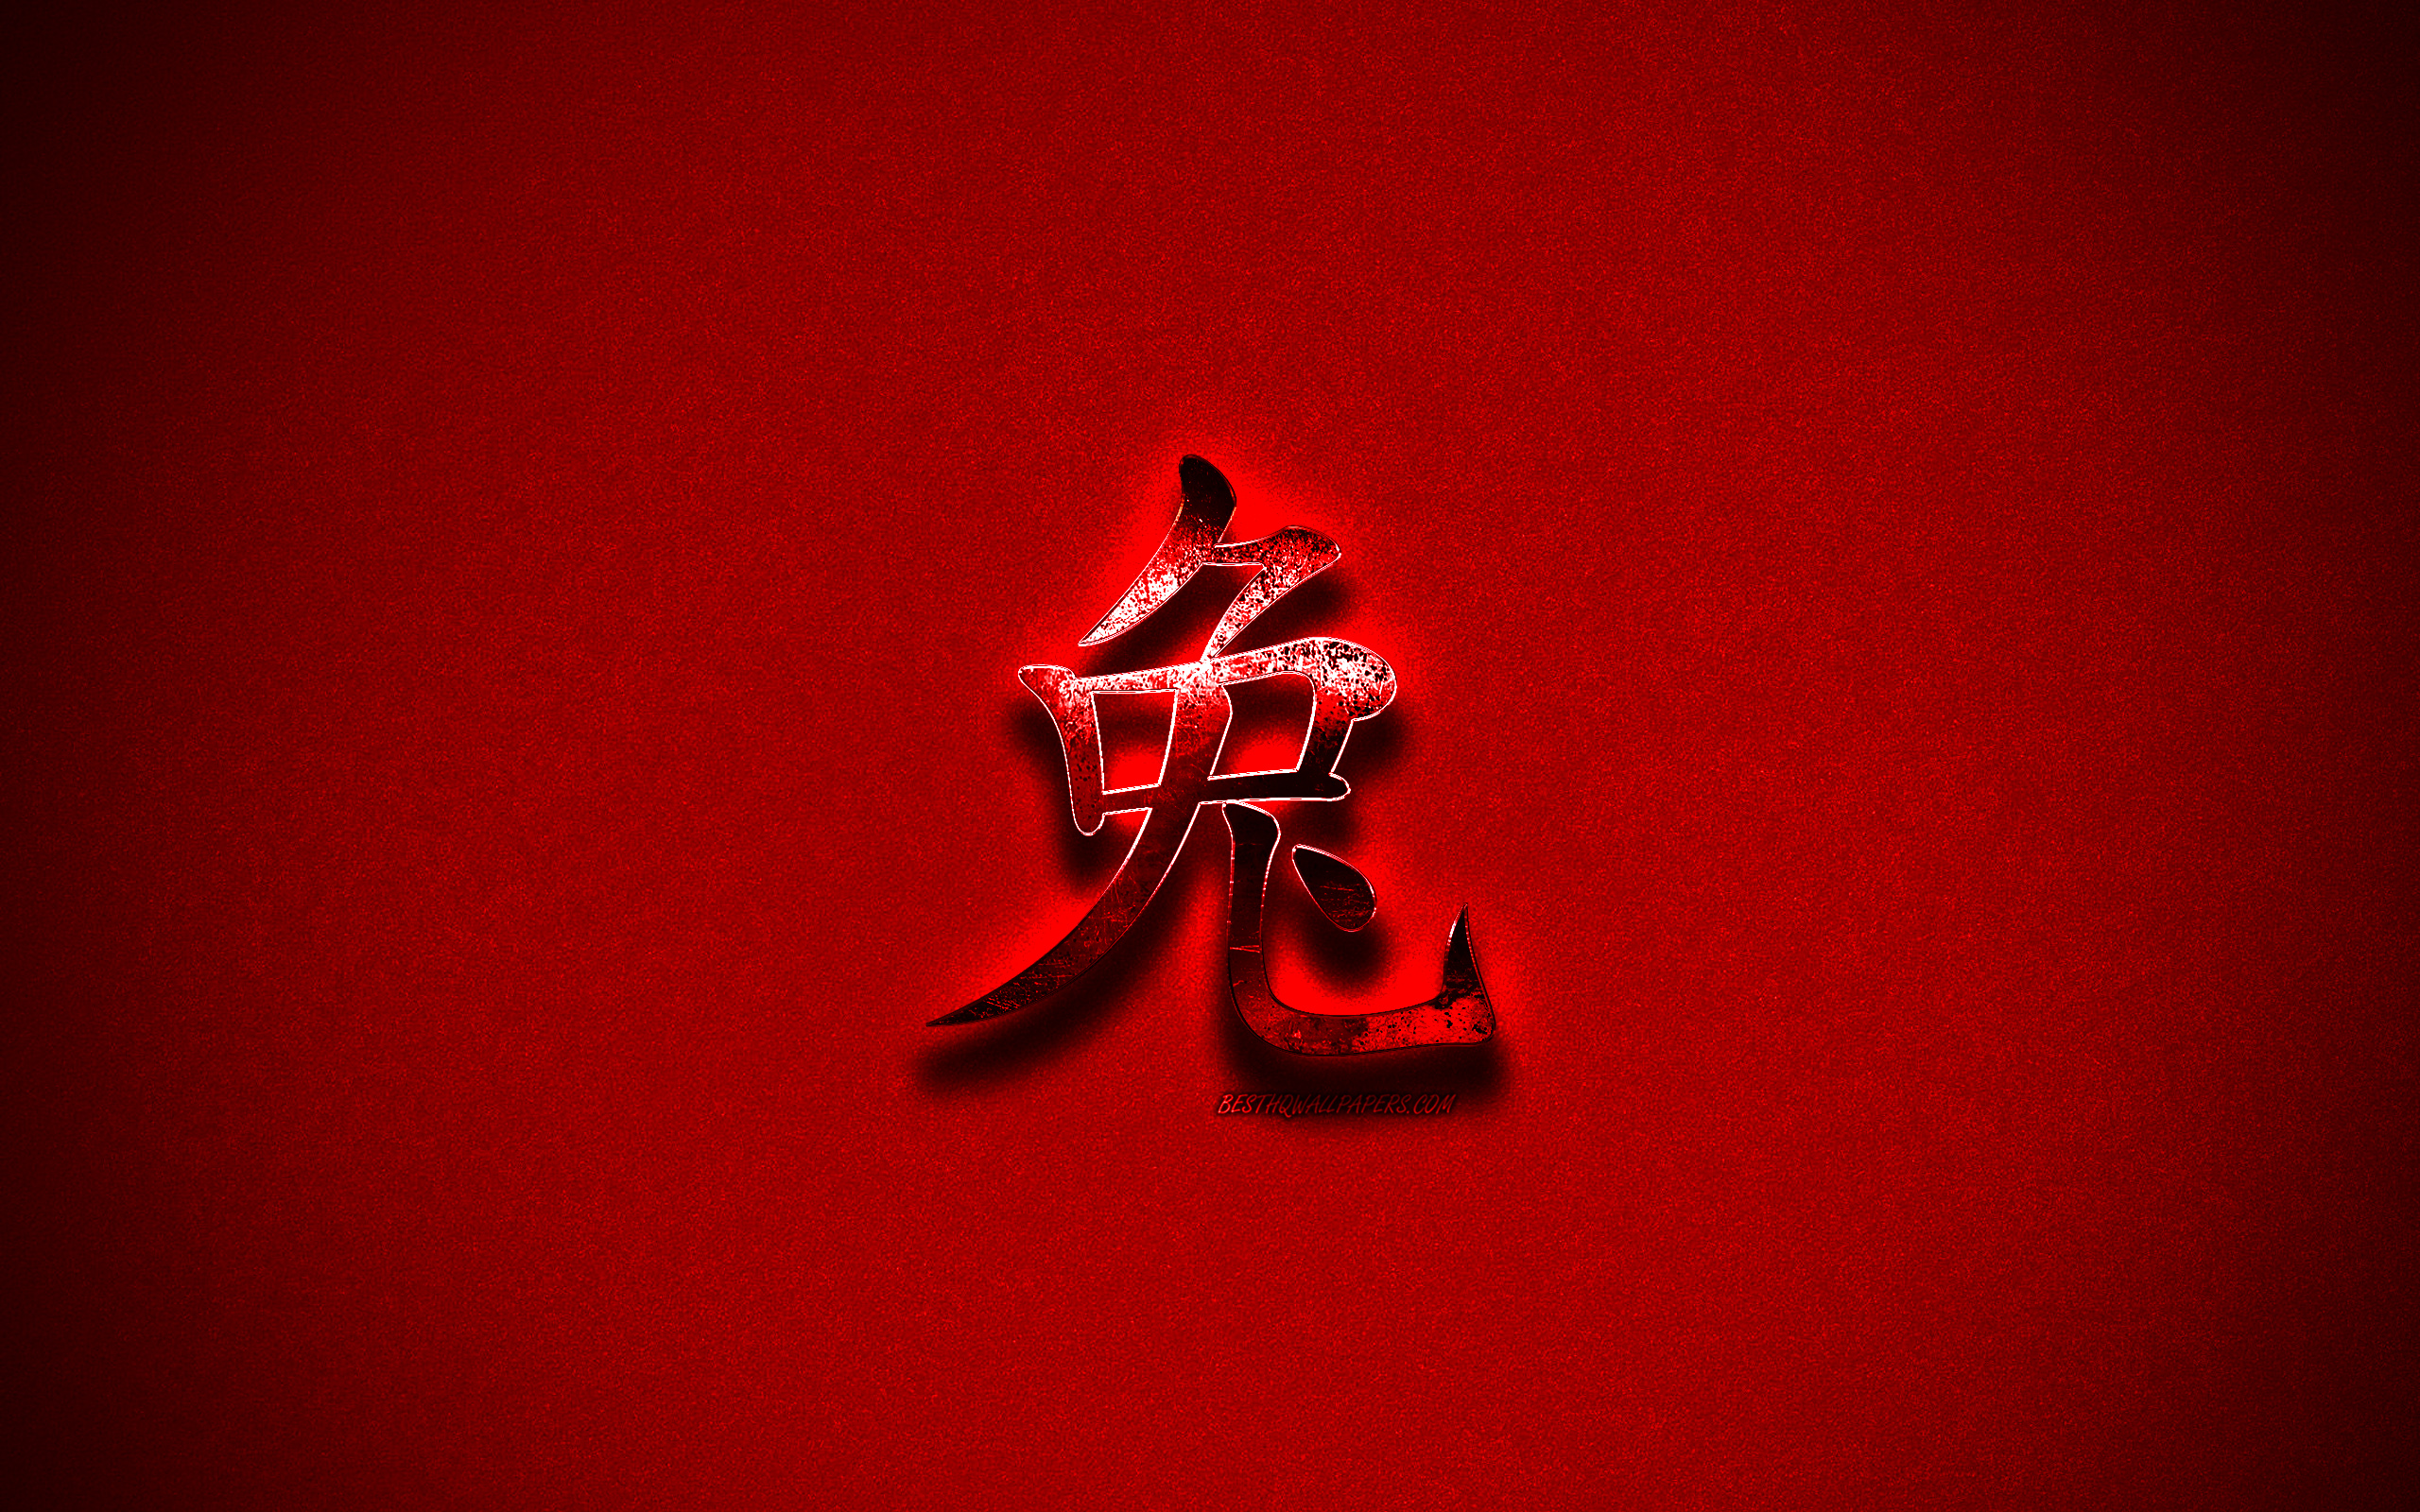 Download wallpaper Rabbit chinese zodiac sign, chinese horoscope, Rabbit sign, metal hieroglyph, Year of the Rabbit, red grunge background, Rabbit Chinese character, Rabbit hieroglyph for desktop with resolution 2560x1600. High Quality HD